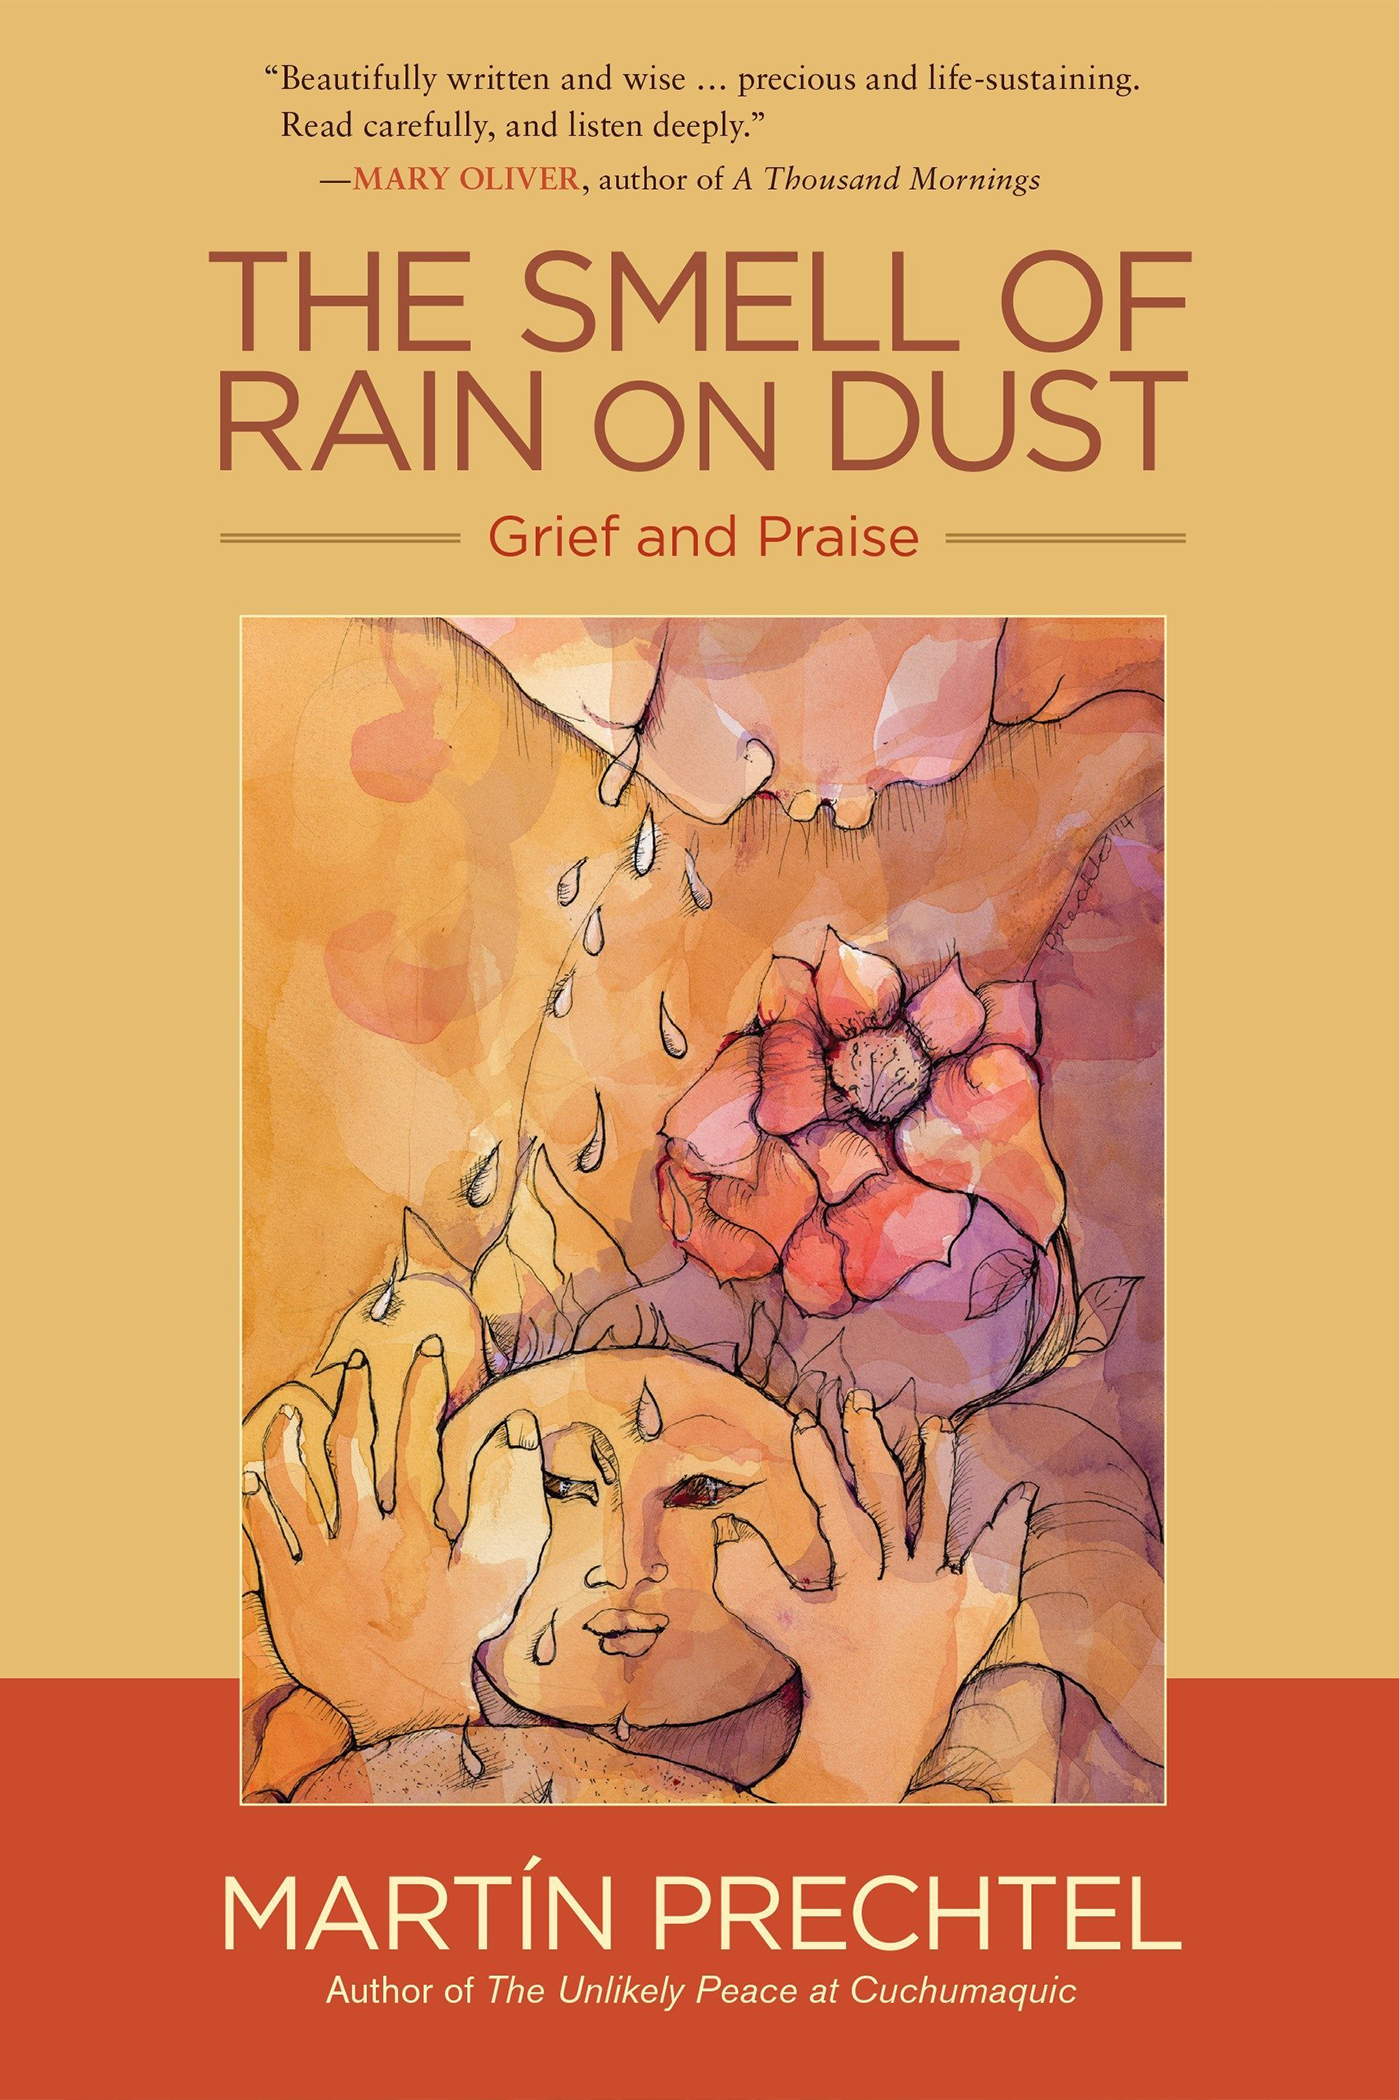 The Smell of Rain on Dust book cover